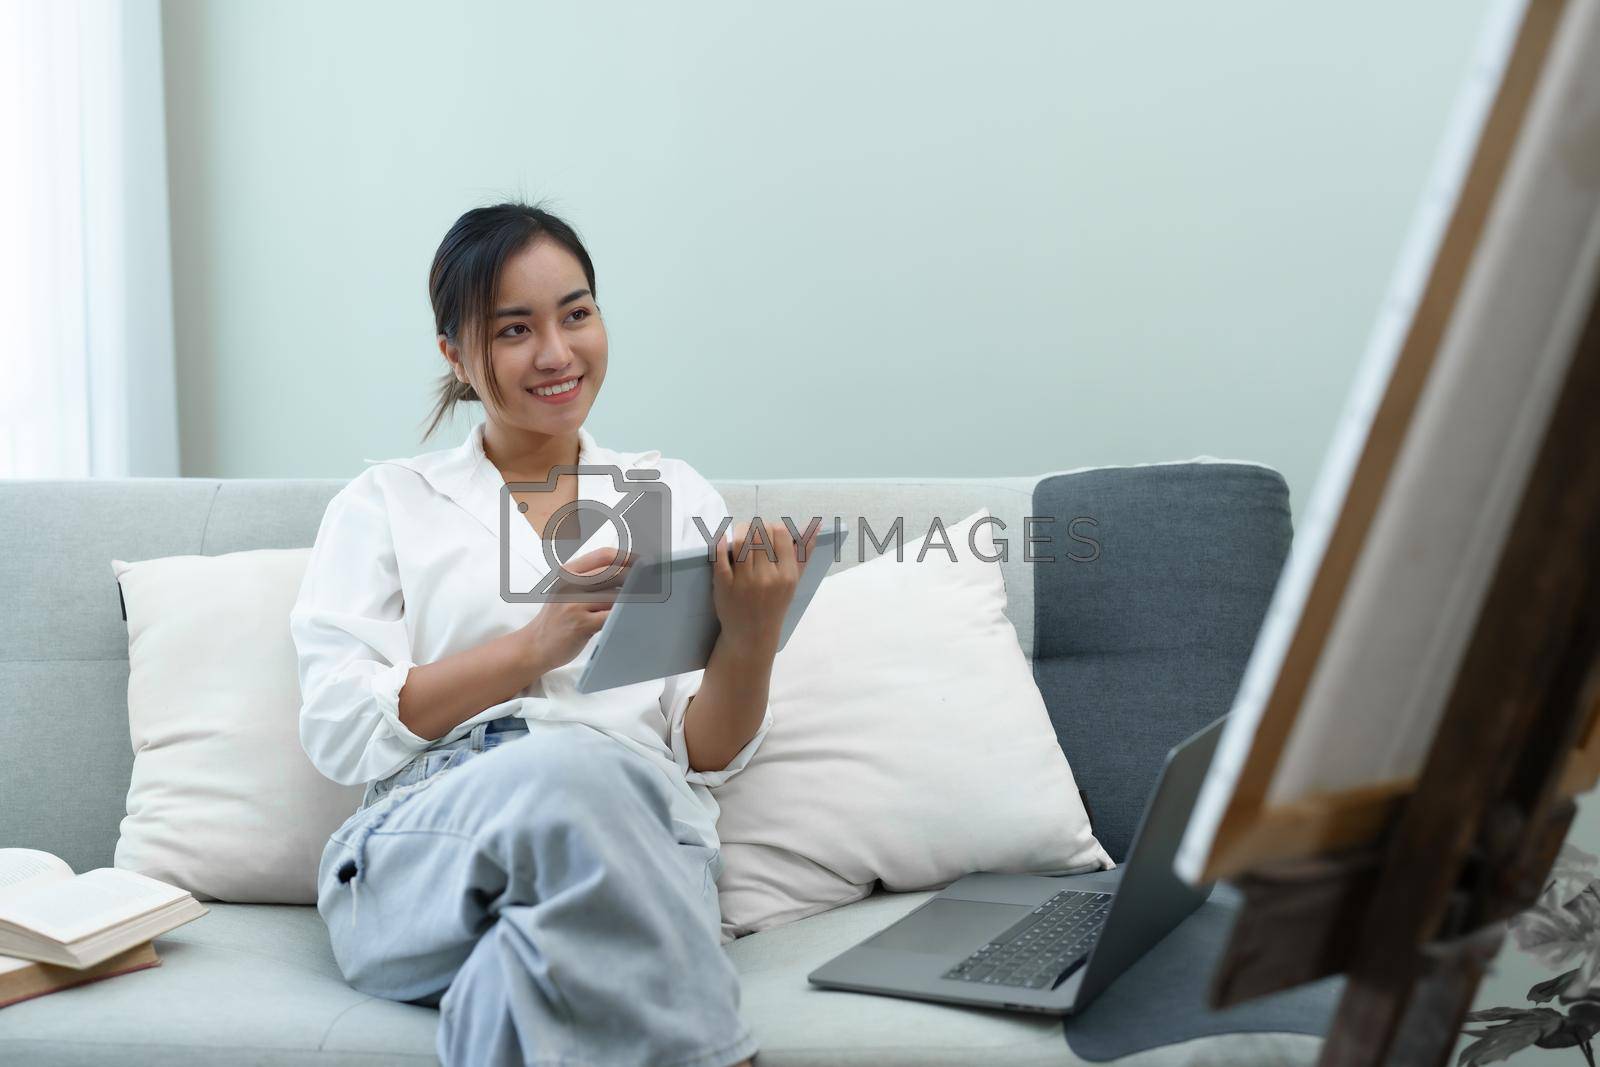 Royalty free image of Portrait of an Asian woman using a tablet to paint artwork on a sofa. by Manastrong